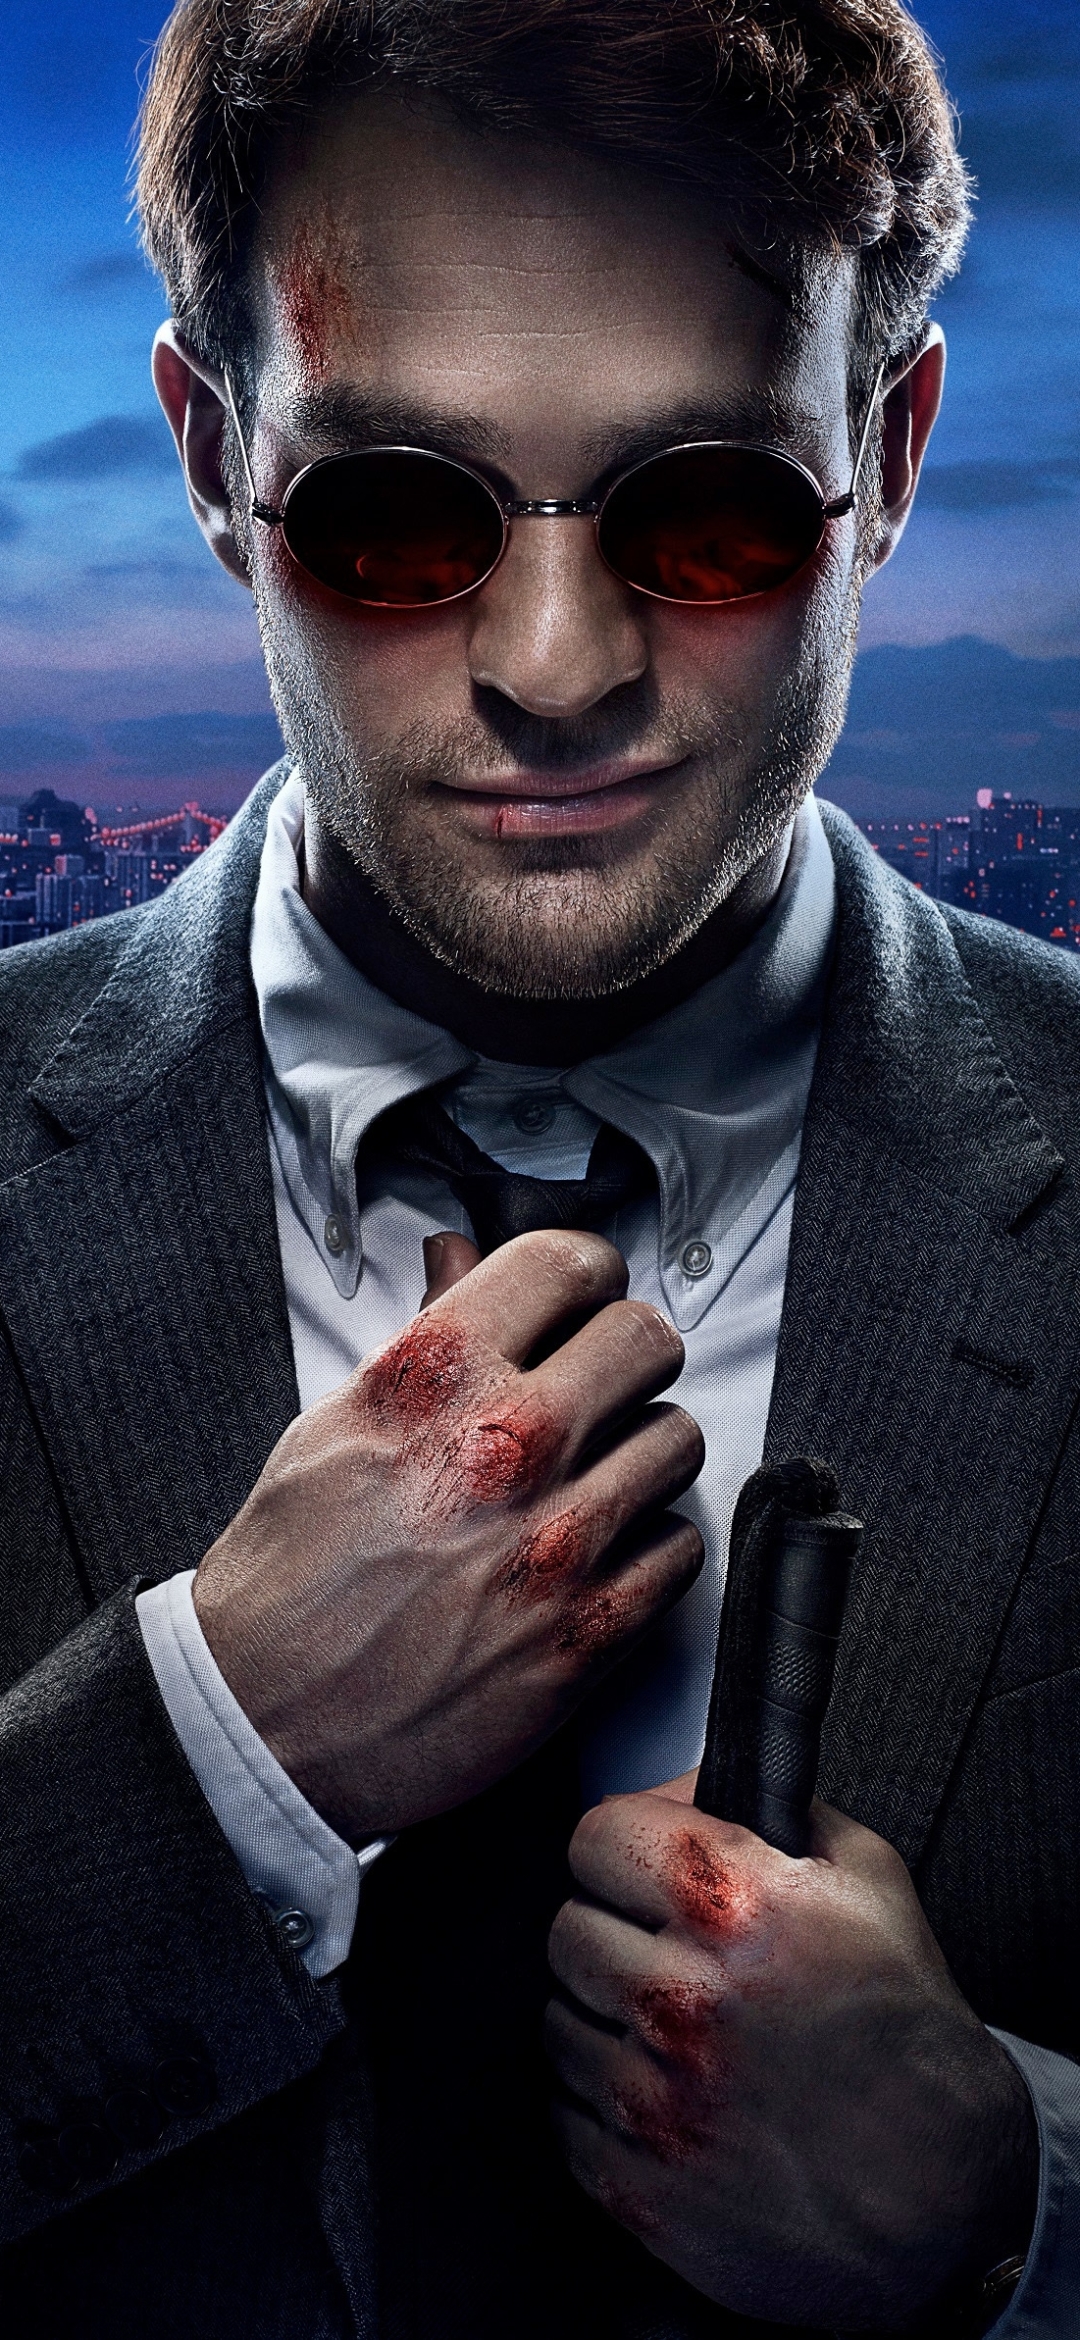 1425307 free wallpaper 1080x2240 for phone, download images  1080x2240 for mobile